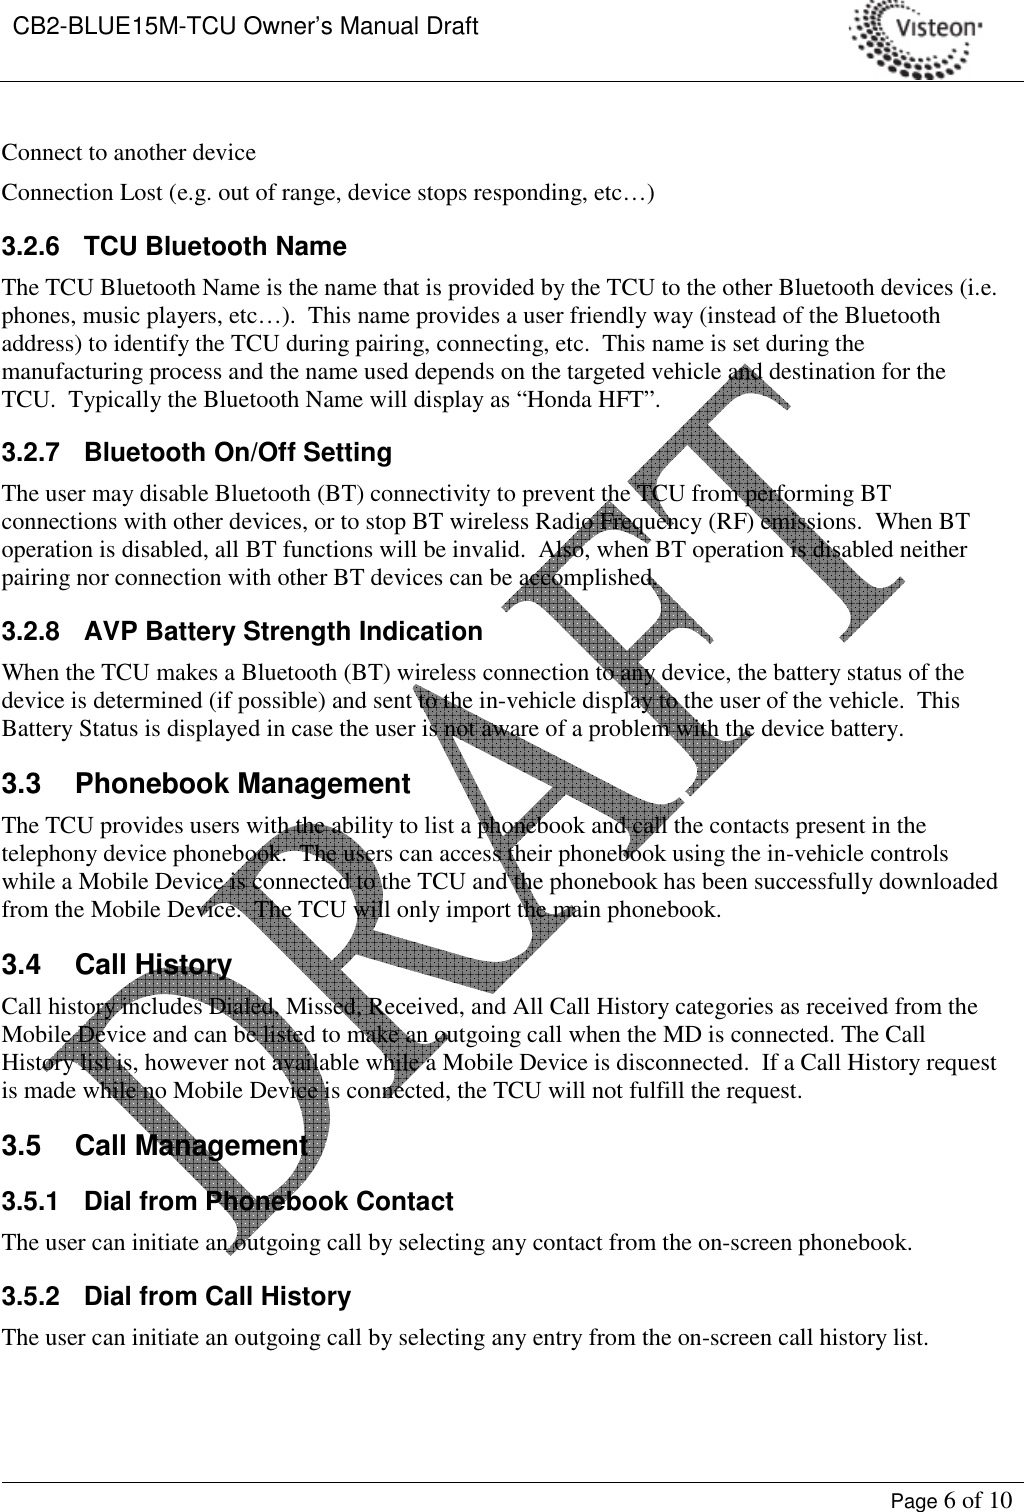 CB2-BLUE15M-TCU Owner’s Manual Draft     Page 6 of 10  Connect to another device  Connection Lost (e.g. out of range, device stops responding, etc…)  3.2.6  TCU Bluetooth Name The TCU Bluetooth Name is the name that is provided by the TCU to the other Bluetooth devices (i.e. phones, music players, etc…).  This name provides a user friendly way (instead of the Bluetooth address) to identify the TCU during pairing, connecting, etc.  This name is set during the manufacturing process and the name used depends on the targeted vehicle and destination for the TCU.  Typically the Bluetooth Name will display as “Honda HFT”. 3.2.7  Bluetooth On/Off Setting The user may disable Bluetooth (BT) connectivity to prevent the TCU from performing BT connections with other devices, or to stop BT wireless Radio Frequency (RF) emissions.  When BT operation is disabled, all BT functions will be invalid.  Also, when BT operation is disabled neither pairing nor connection with other BT devices can be accomplished. 3.2.8  AVP Battery Strength Indication When the TCU makes a Bluetooth (BT) wireless connection to any device, the battery status of the device is determined (if possible) and sent to the in-vehicle display to the user of the vehicle.  This Battery Status is displayed in case the user is not aware of a problem with the device battery.   3.3  Phonebook Management The TCU provides users with the ability to list a phonebook and call the contacts present in the telephony device phonebook.  The users can access their phonebook using the in-vehicle controls while a Mobile Device is connected to the TCU and the phonebook has been successfully downloaded from the Mobile Device.  The TCU will only import the main phonebook.   3.4  Call History Call history includes Dialed, Missed, Received, and All Call History categories as received from the Mobile Device and can be listed to make an outgoing call when the MD is connected. The Call History list is, however not available while a Mobile Device is disconnected.  If a Call History request is made while no Mobile Device is connected, the TCU will not fulfill the request. 3.5  Call Management 3.5.1  Dial from Phonebook Contact The user can initiate an outgoing call by selecting any contact from the on-screen phonebook. 3.5.2  Dial from Call History The user can initiate an outgoing call by selecting any entry from the on-screen call history list. 